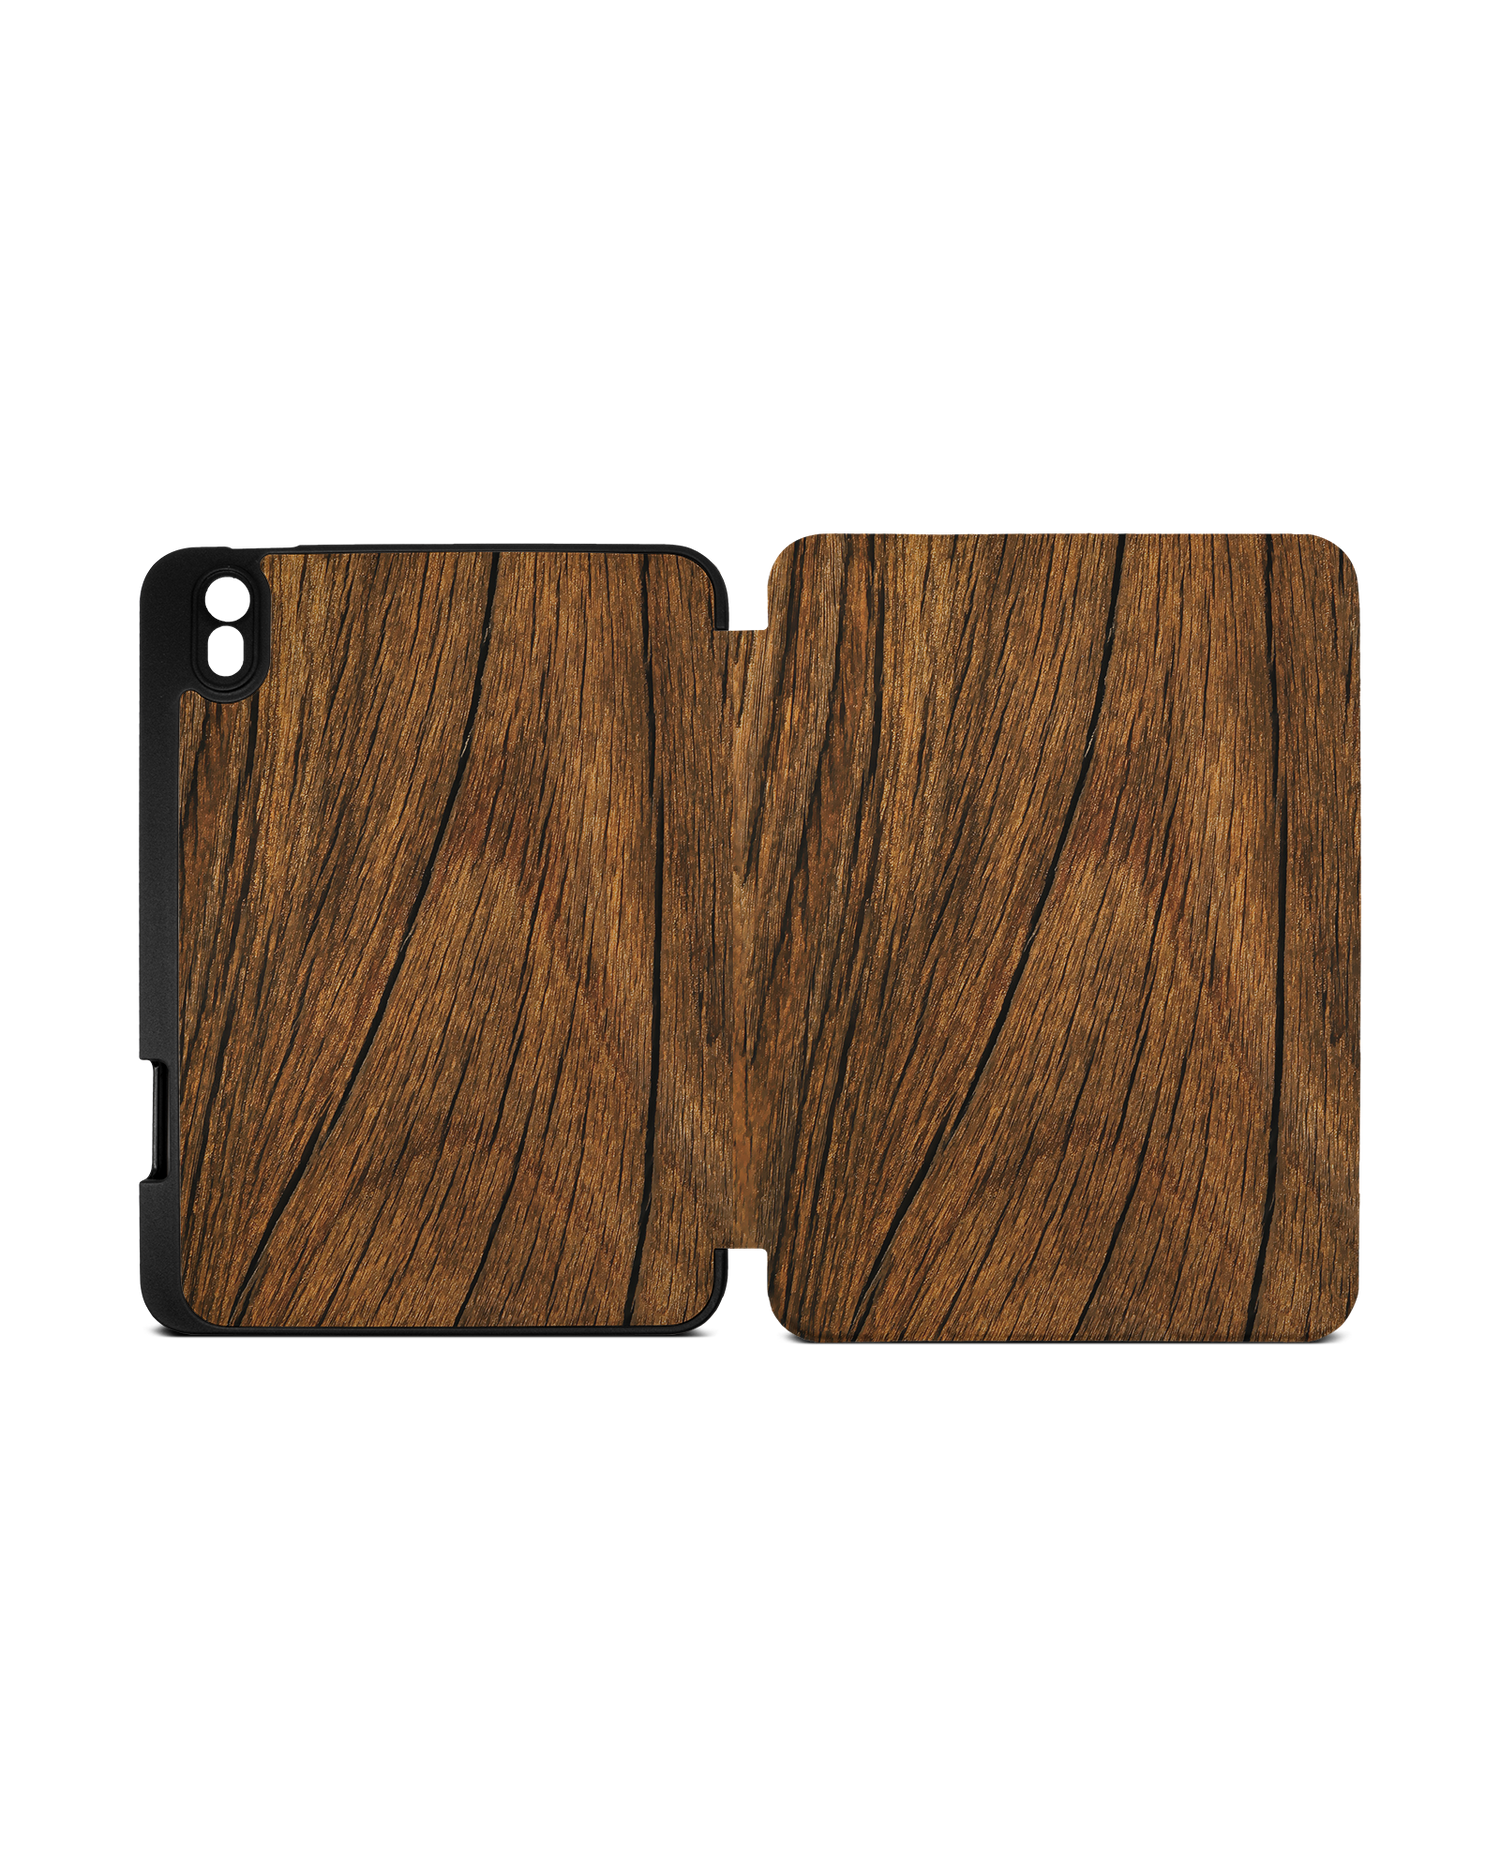 Wood iPad Case with Pencil Holder Apple iPad mini 6 (2021): Opened exterior view